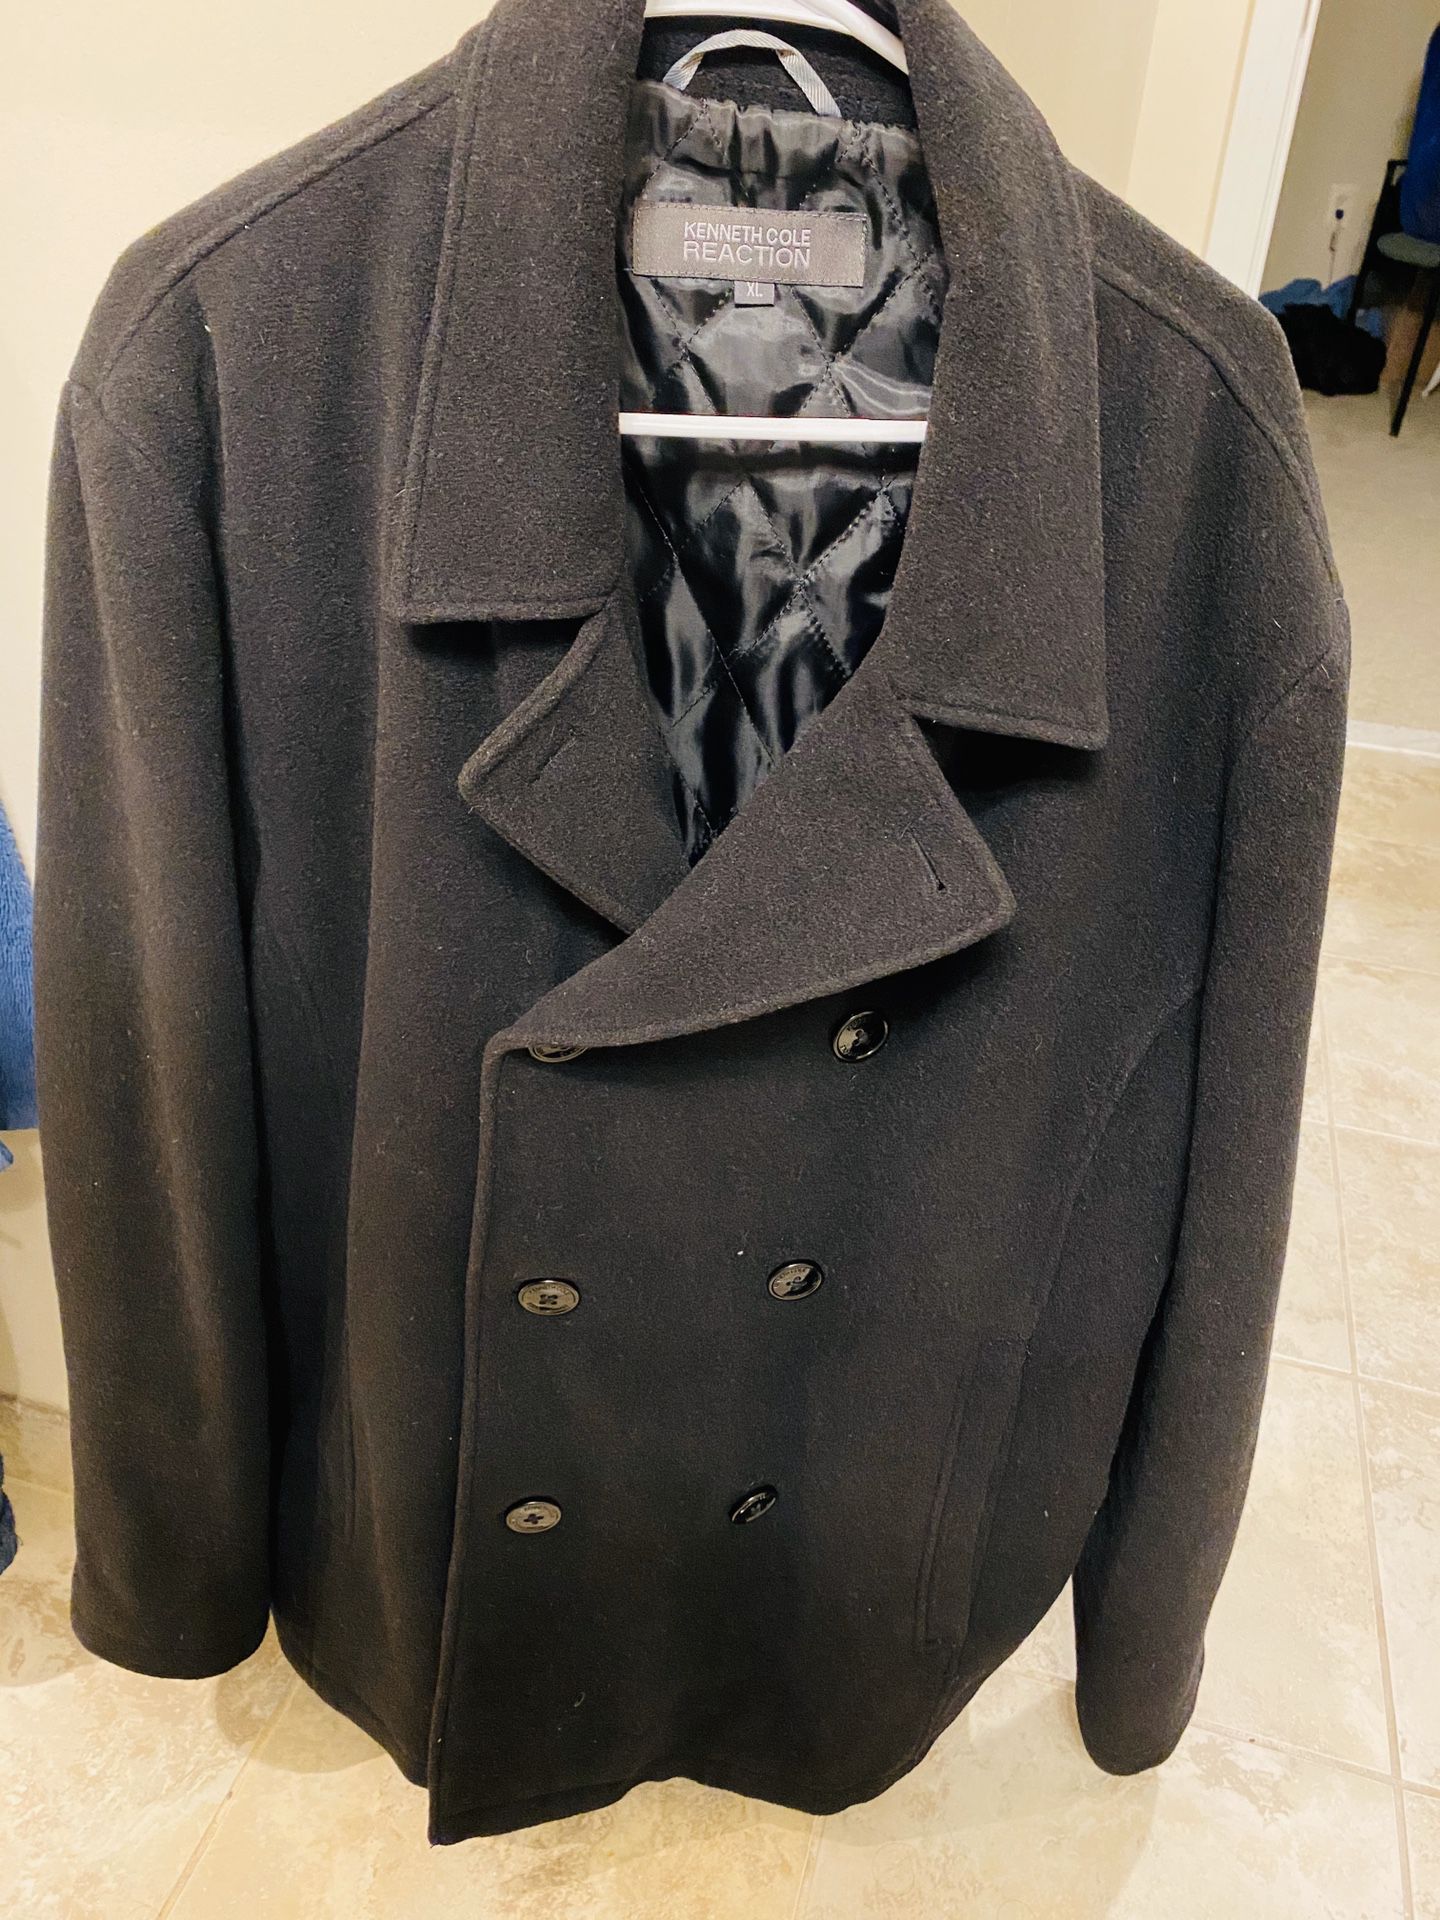 Kenneth Cole Reaction Wool coat